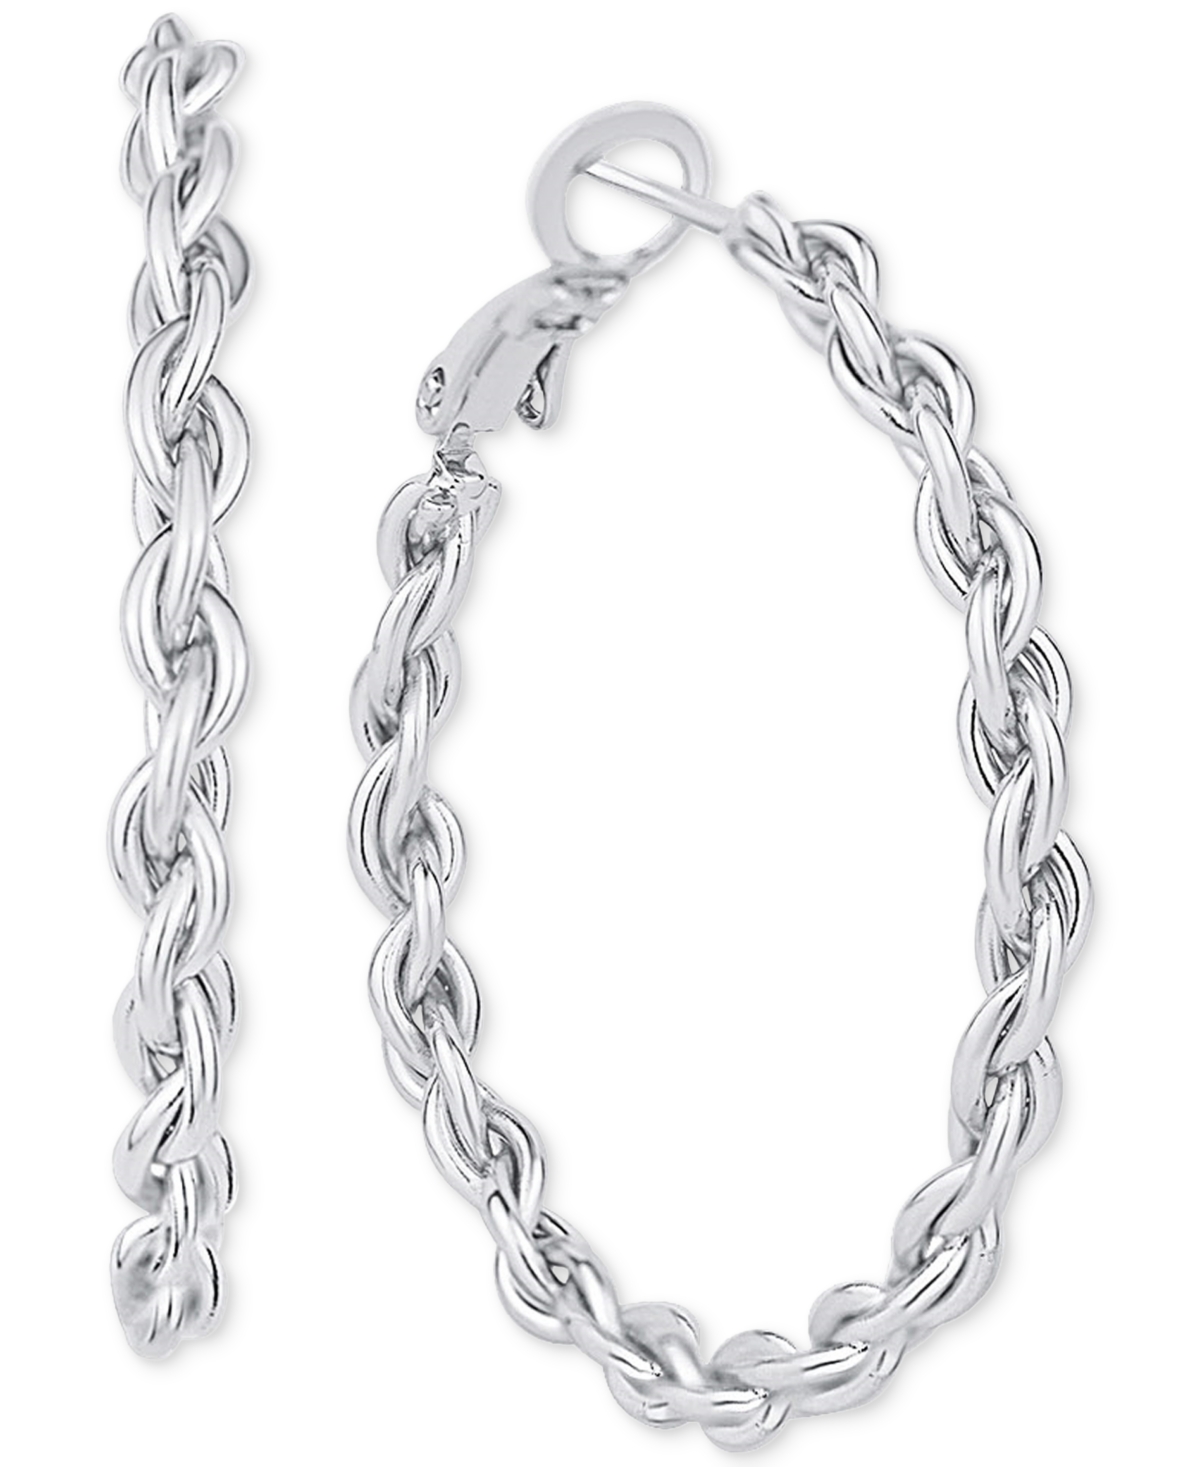 And Now This Braided Link Medium Hoop Earrings, 1.37" In Silver Plated